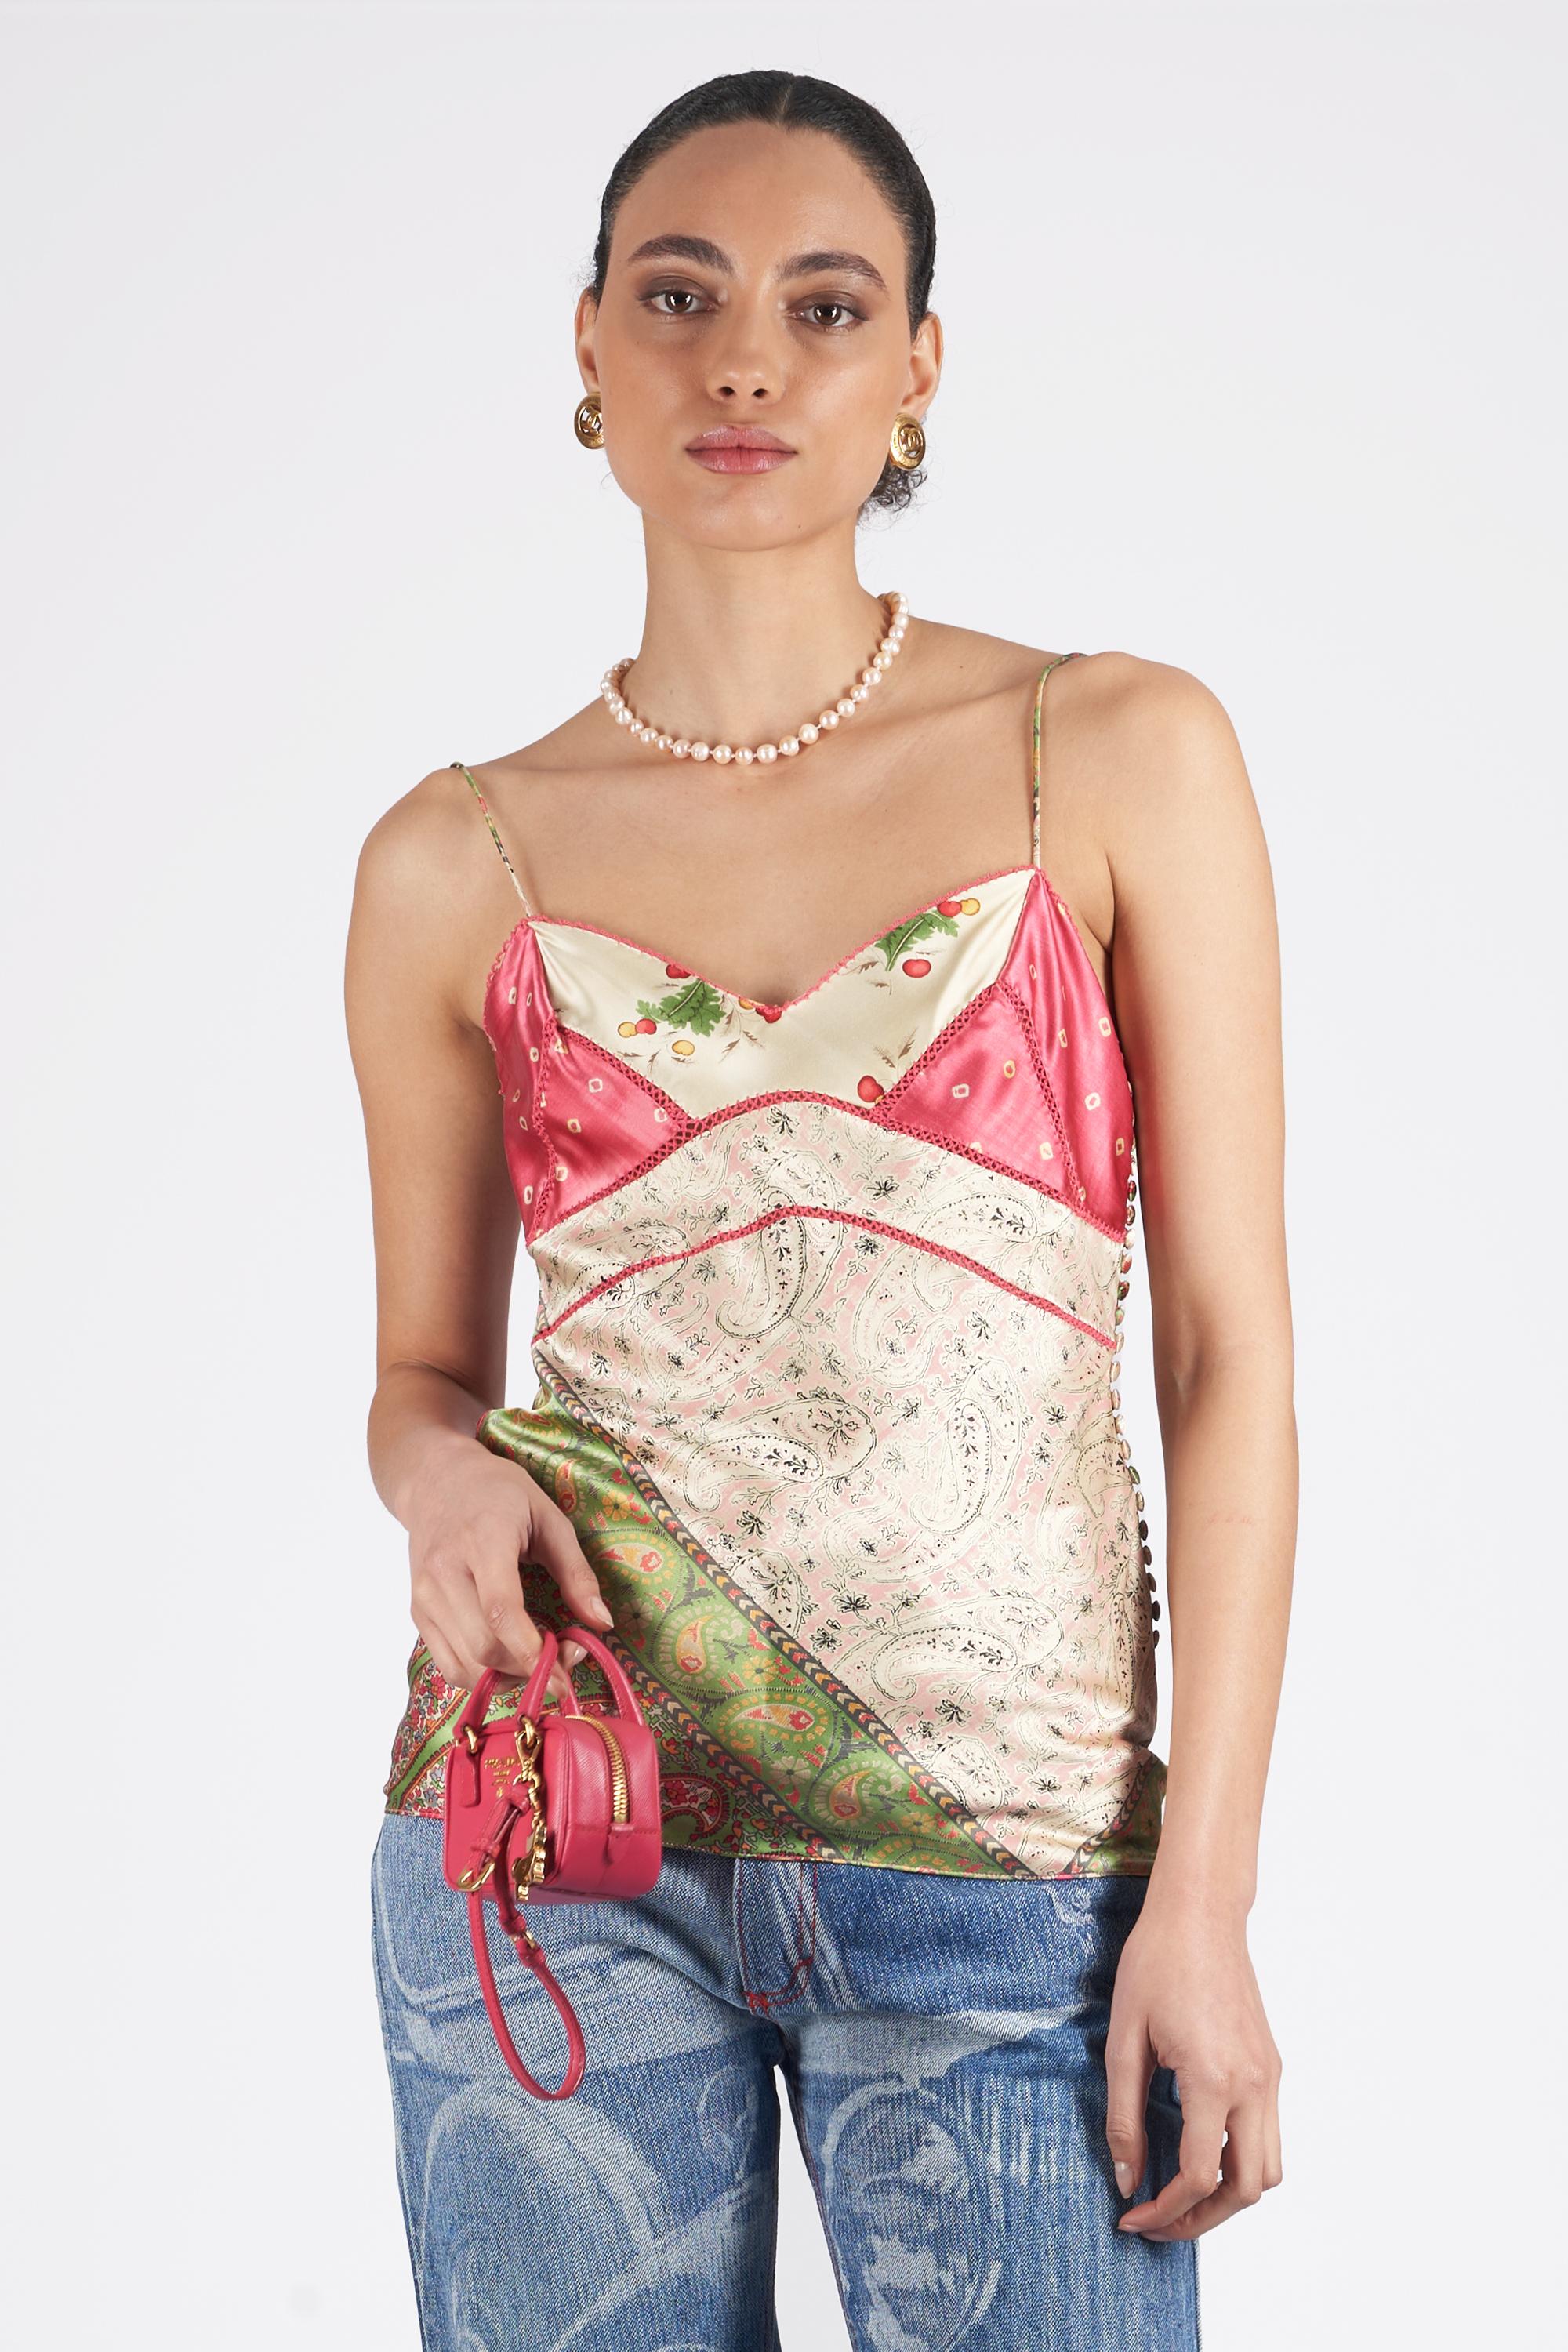 We are excited to present this John Galliano for Christian Dior Fall Winter 2003 silk cami top. Features spaghetti straps, floral patchwork pattern with coated side buttons and zip closure. Pre-loved, in excellent vintage condition. Authenticity